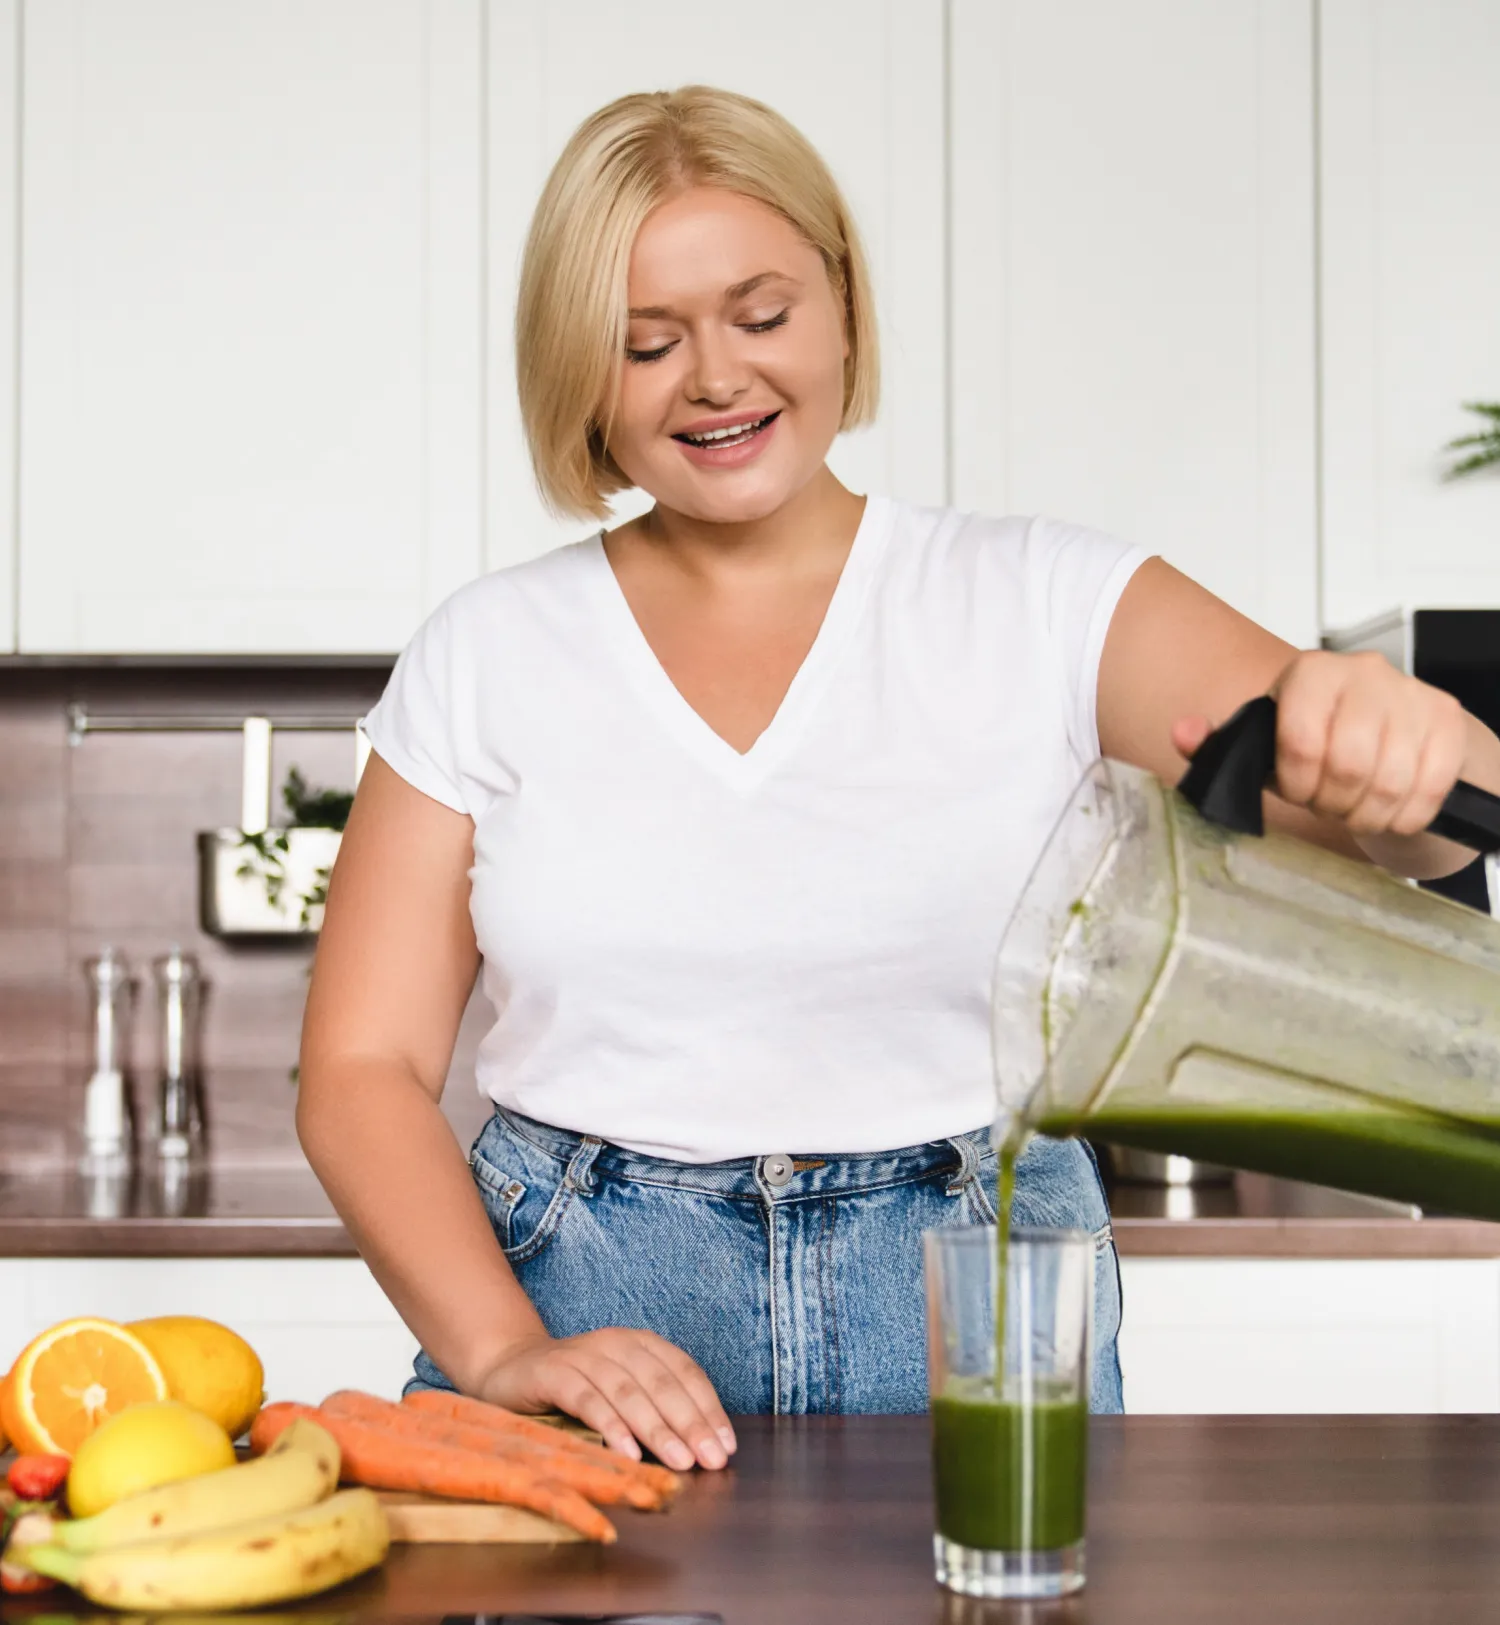 woman making a smoothie to eat because gastric sleeve surgery lowered her appetite